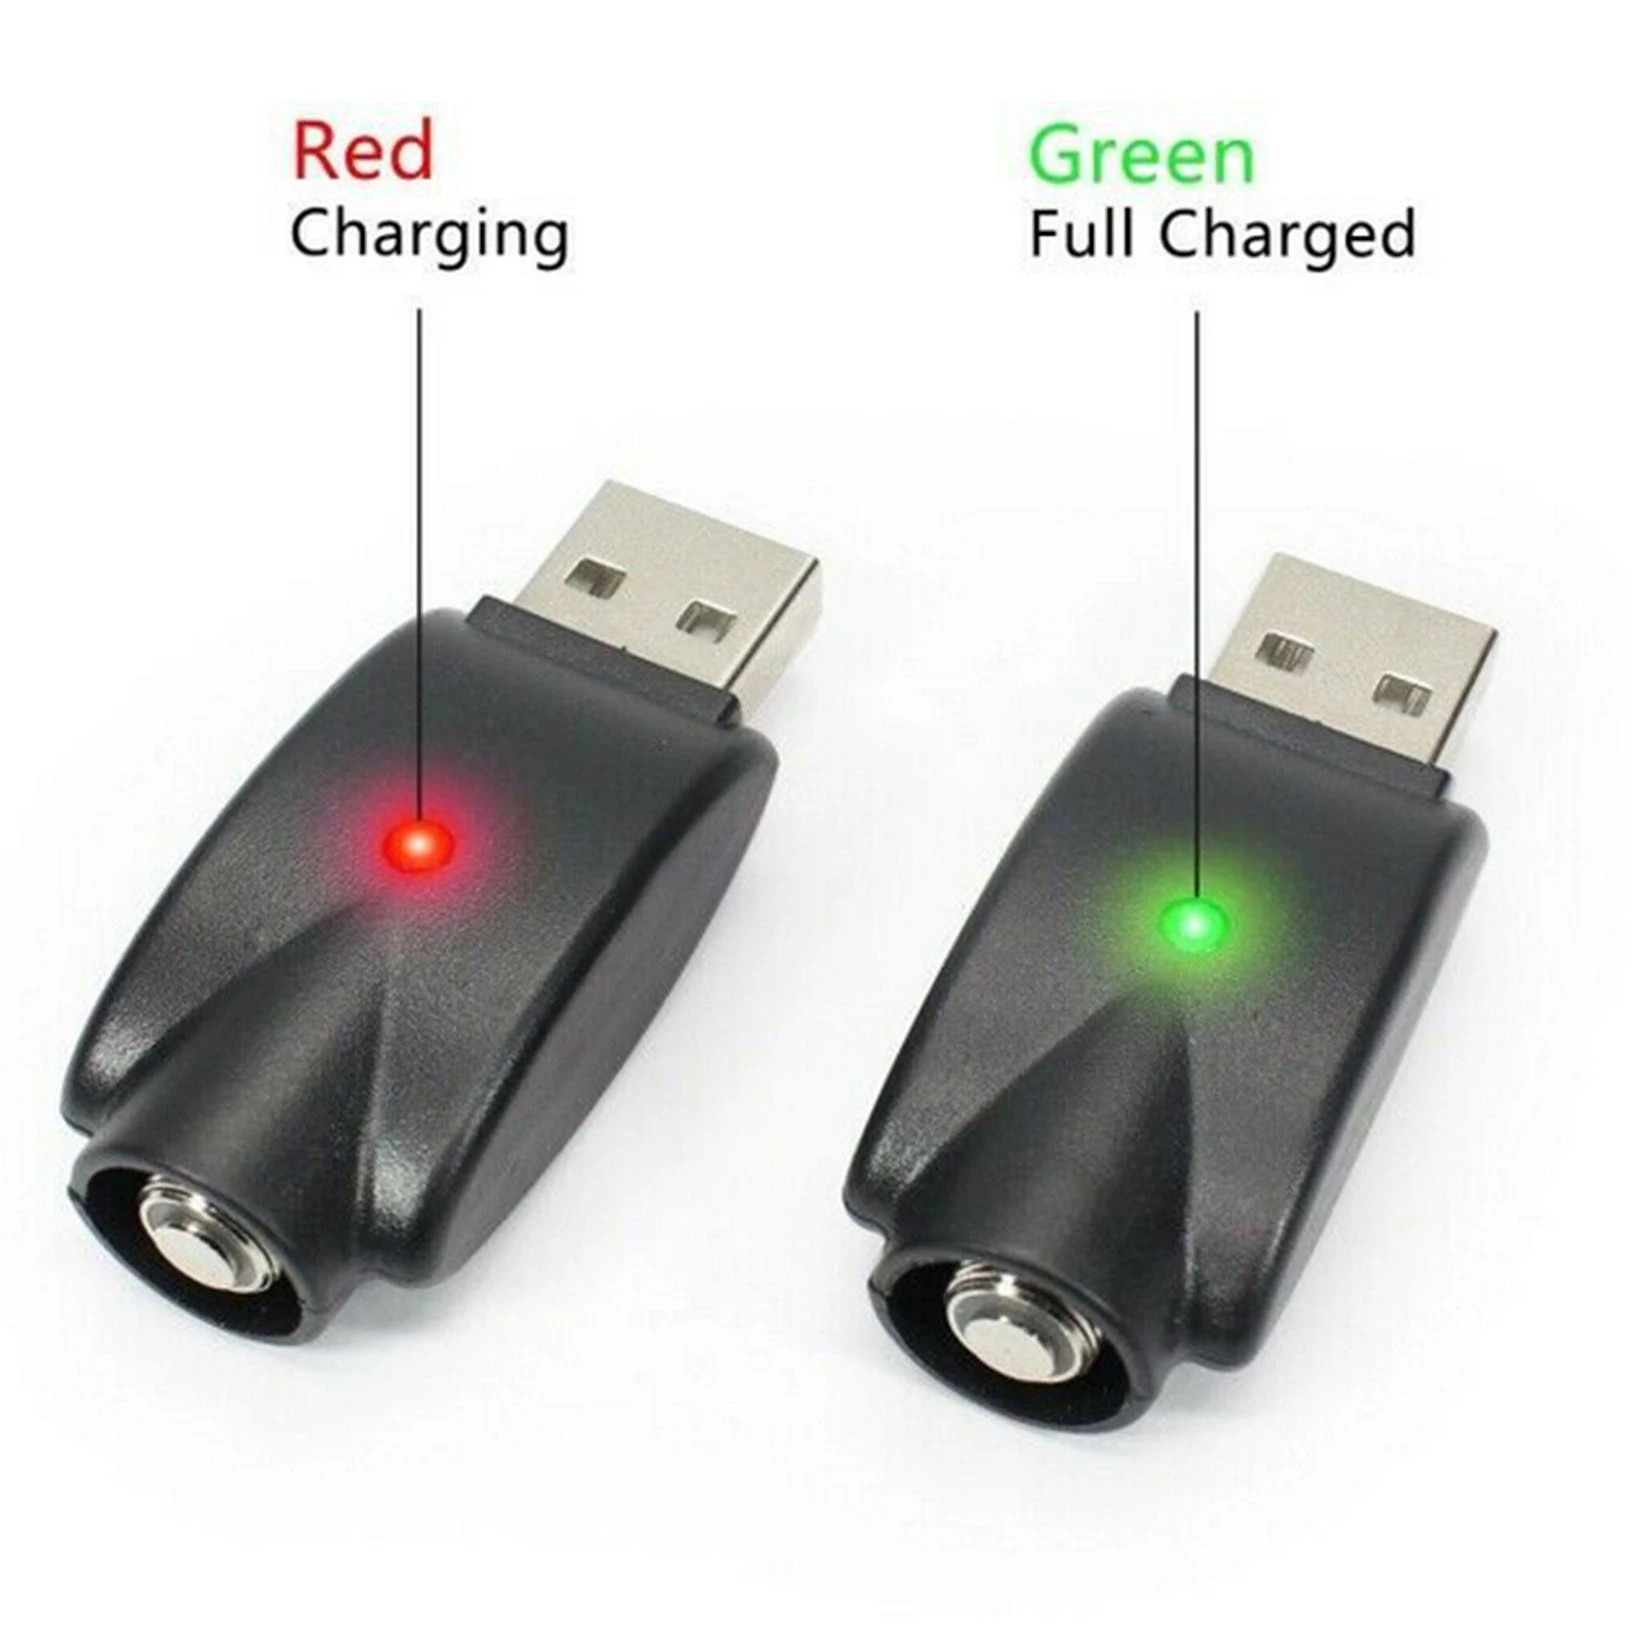 Intelligent Overcharge Protection Smart USB Charger, 2-Pack Compatible for USB Adapter with LED Indicator 